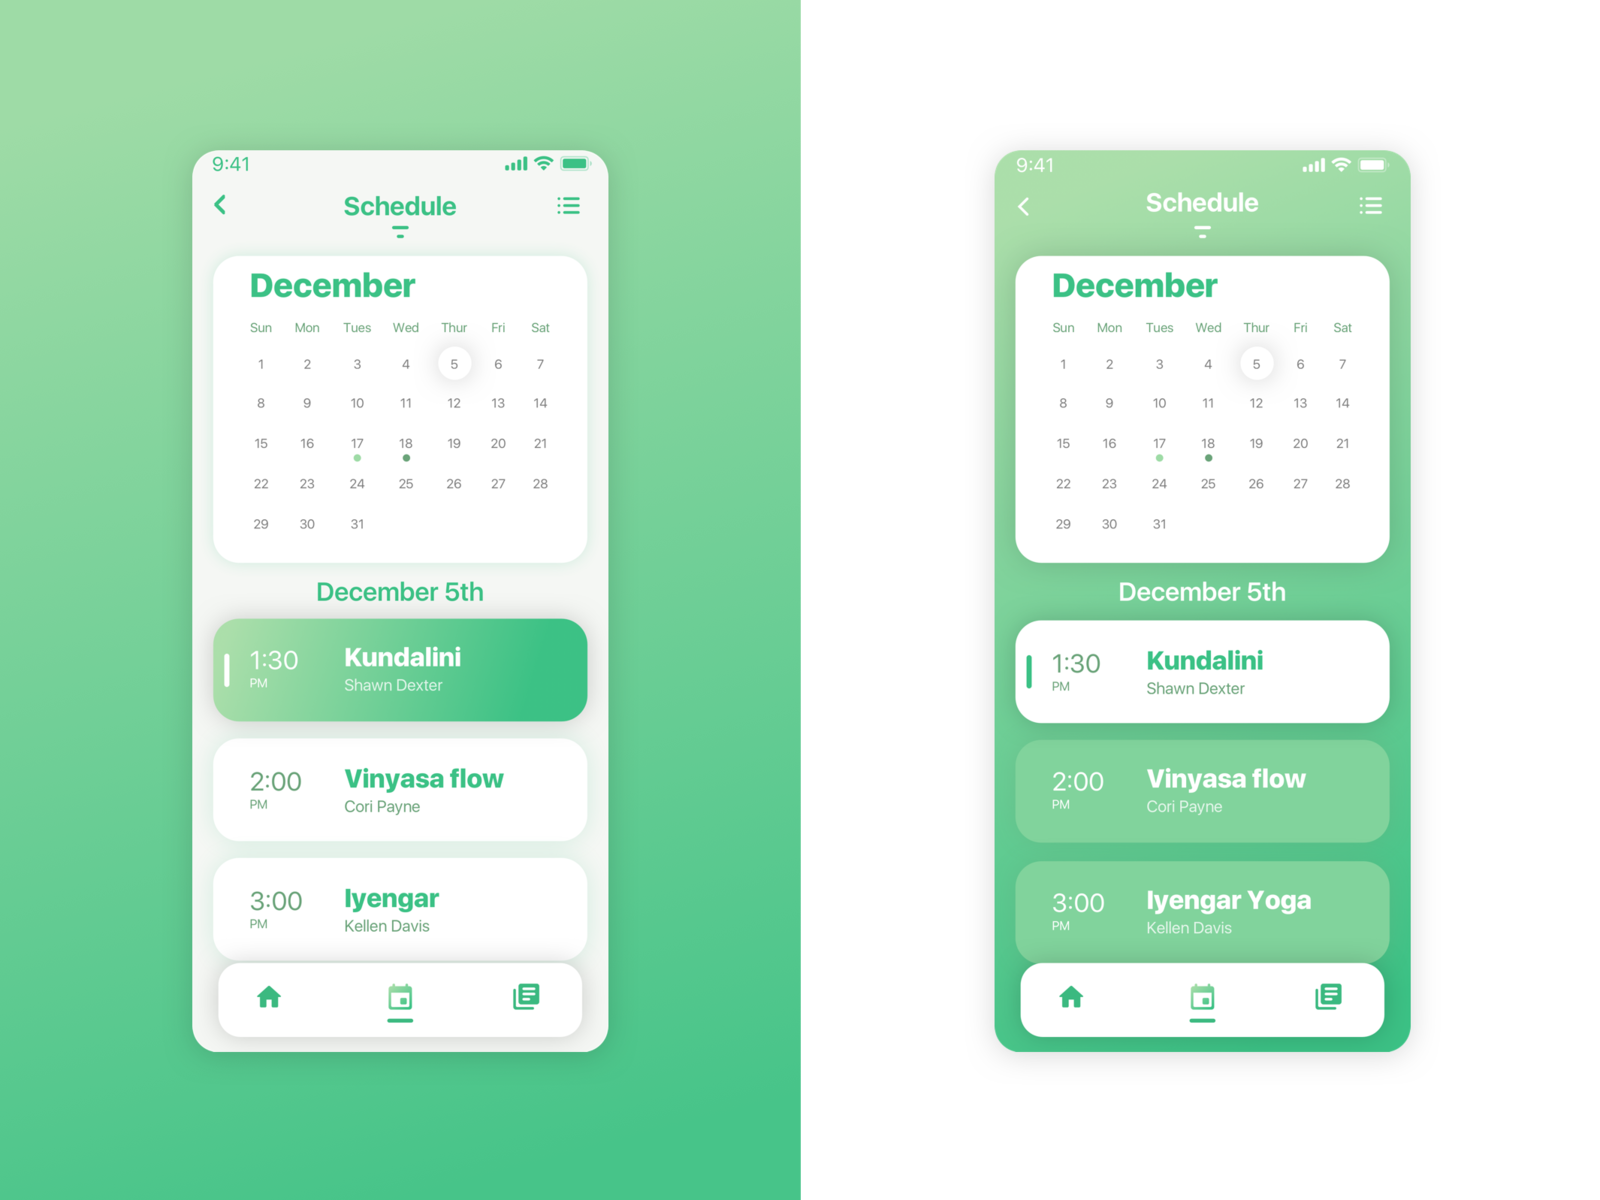 Yogaworks Redesign - Schedule by Natalie on Dribbble